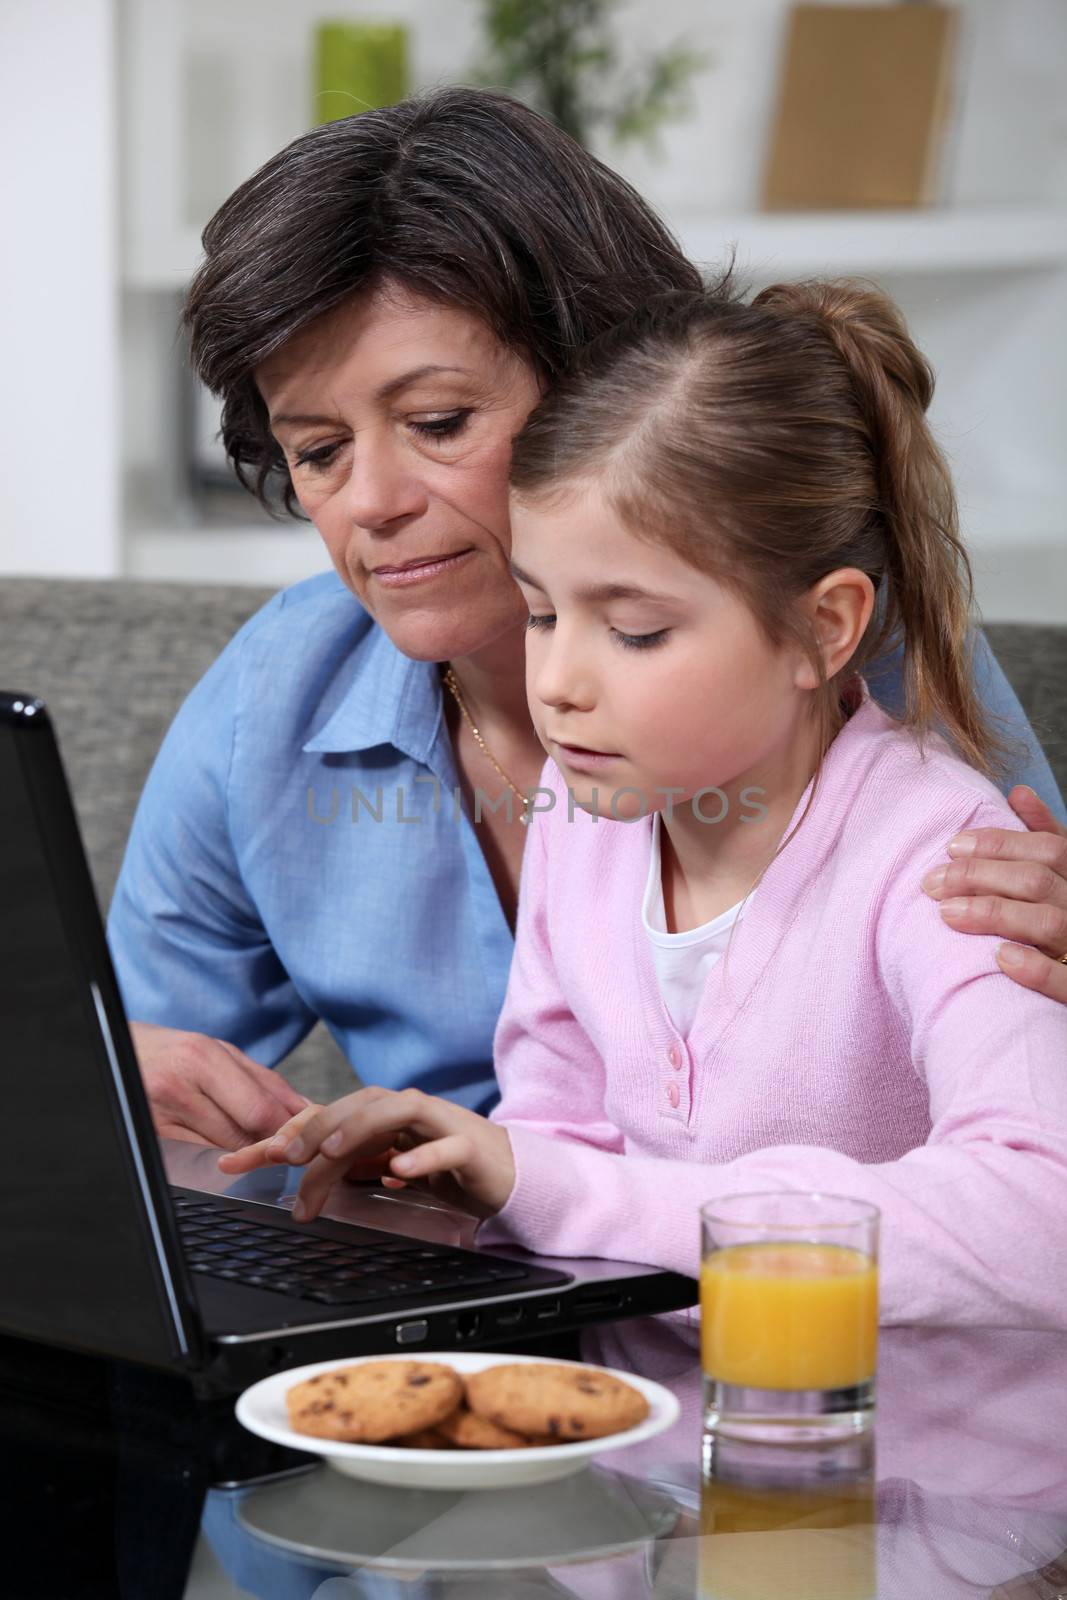 Child and her grandmother using a laptop